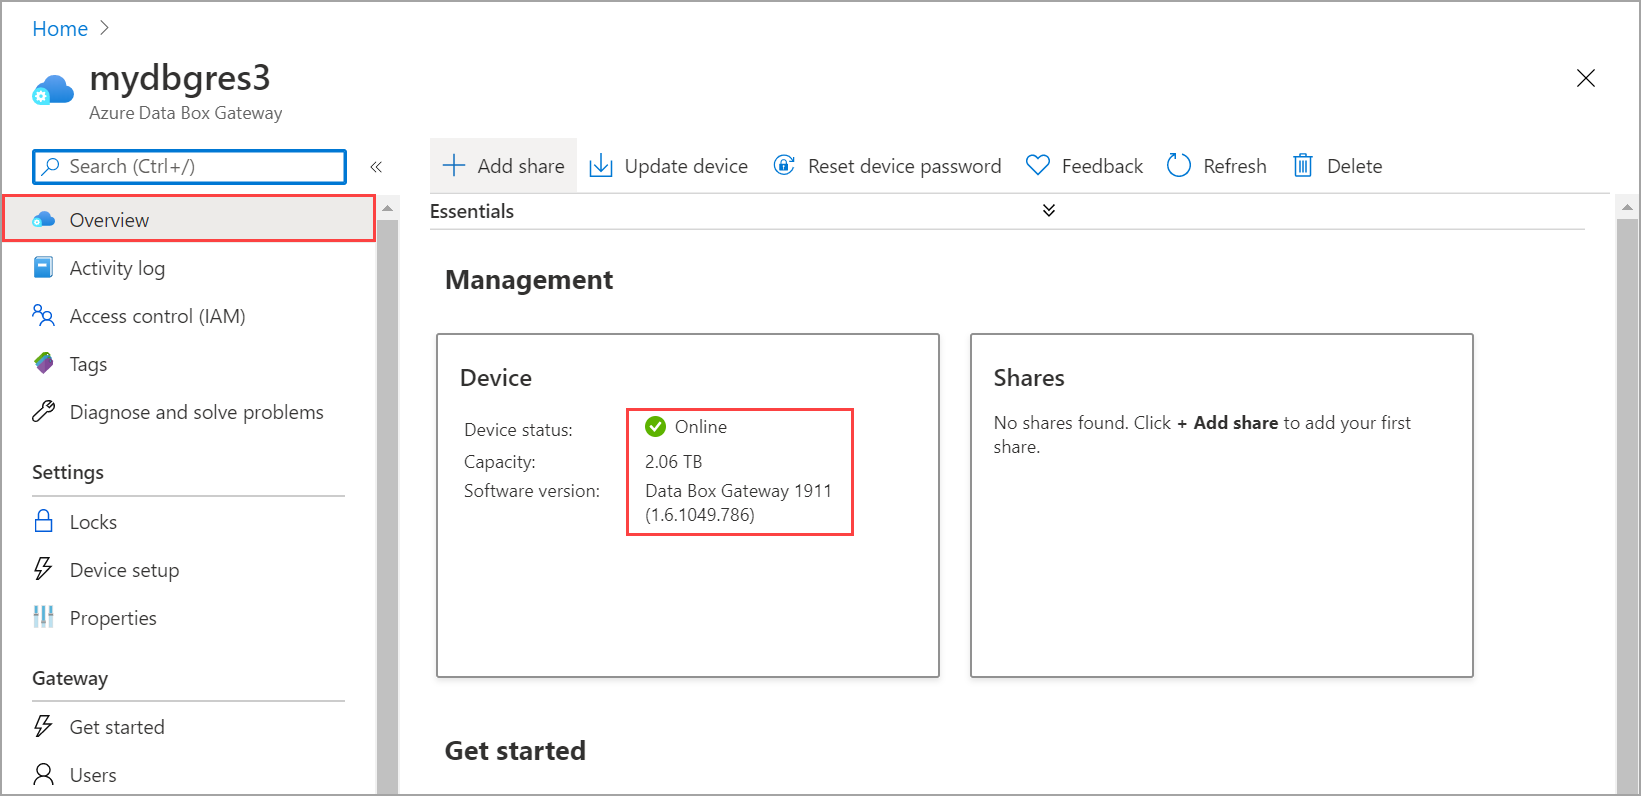 Screenshot of the Azure Data Box Gateway Home page with the Overview option and the Online status called out.